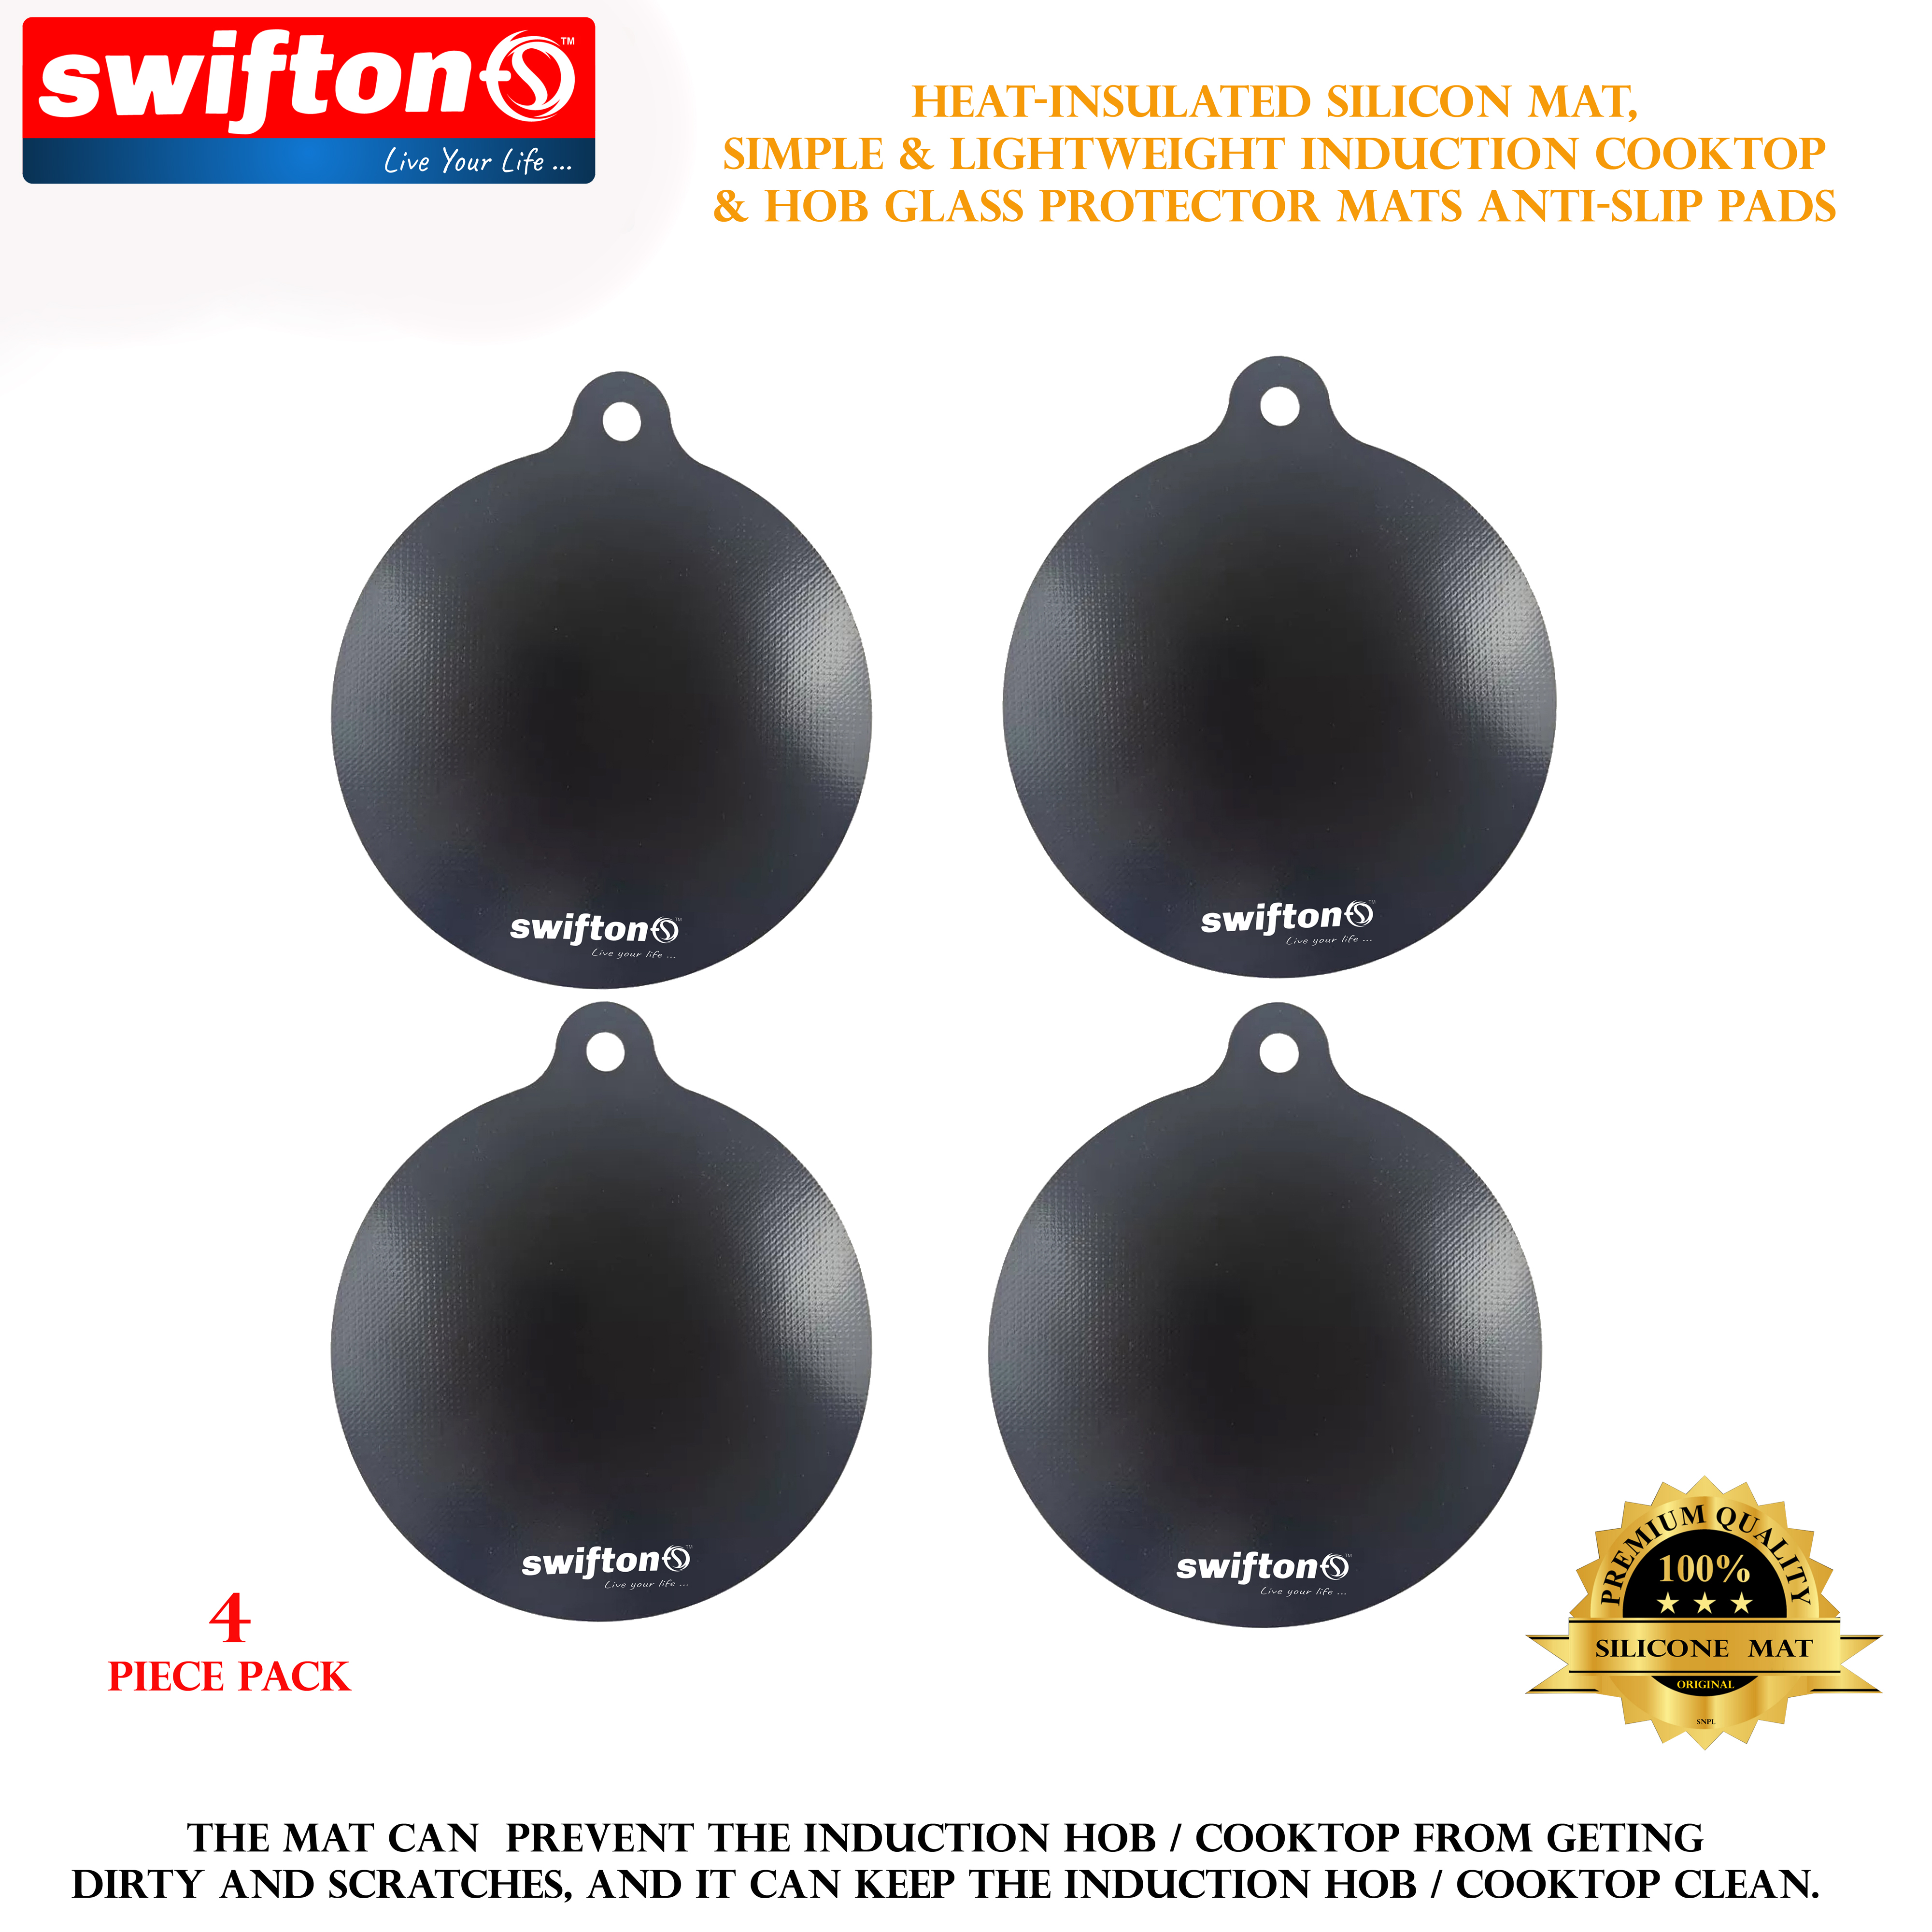 Swifton Silicon Mats for Induction cooktop, 4 piece Set, Simple